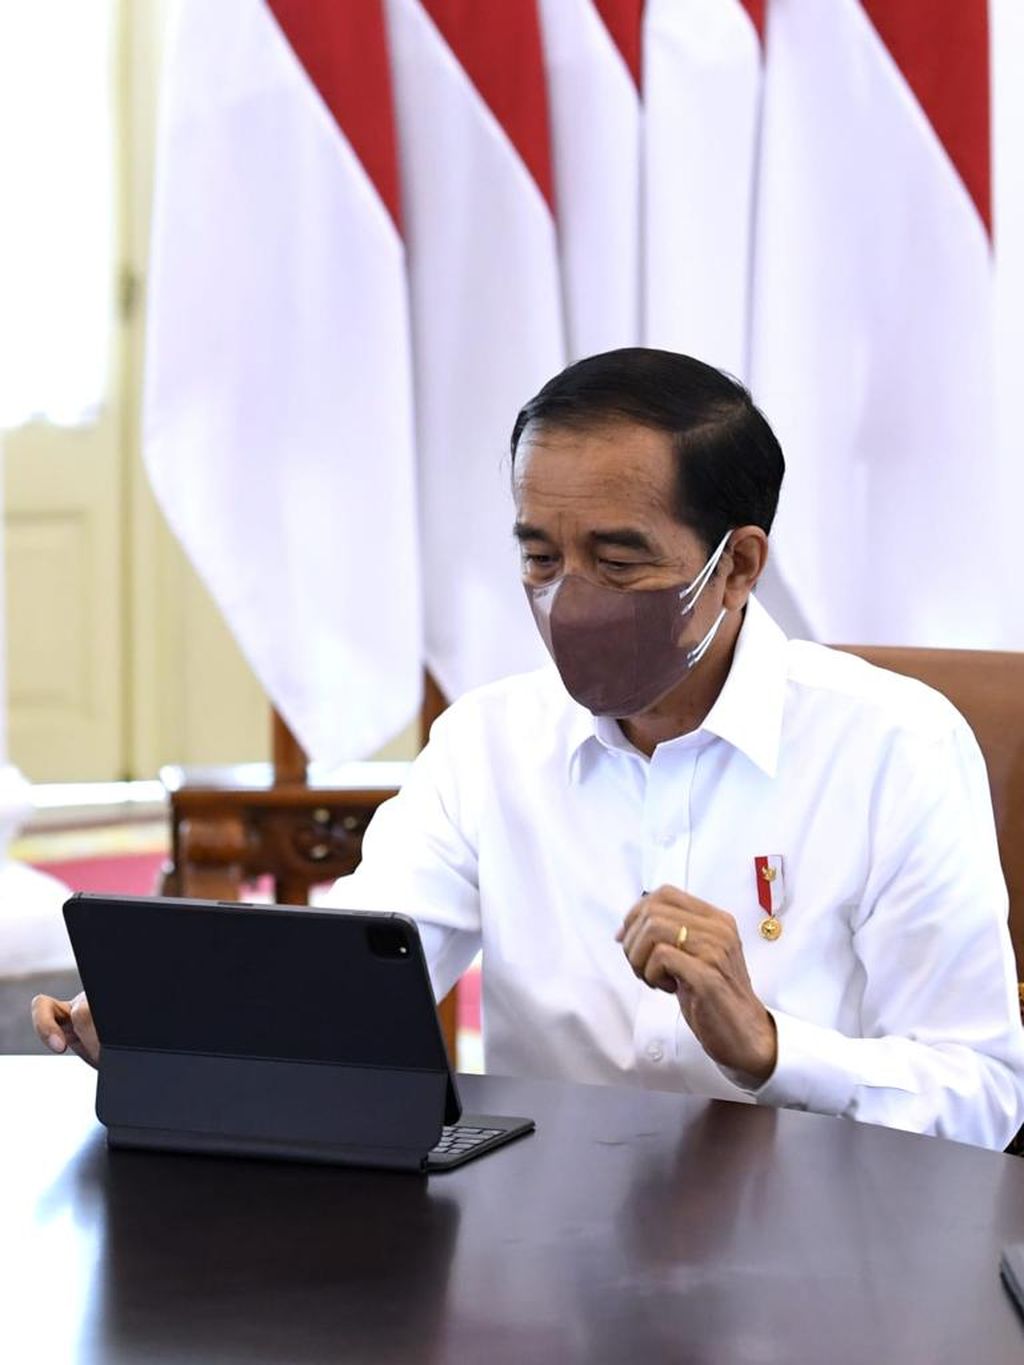 President Joko Widodo reports the Annual Income Tax Return through the online e-filing application at the Bogor Presidential Palace, West Java, on Friday, March 4, 2022.2.